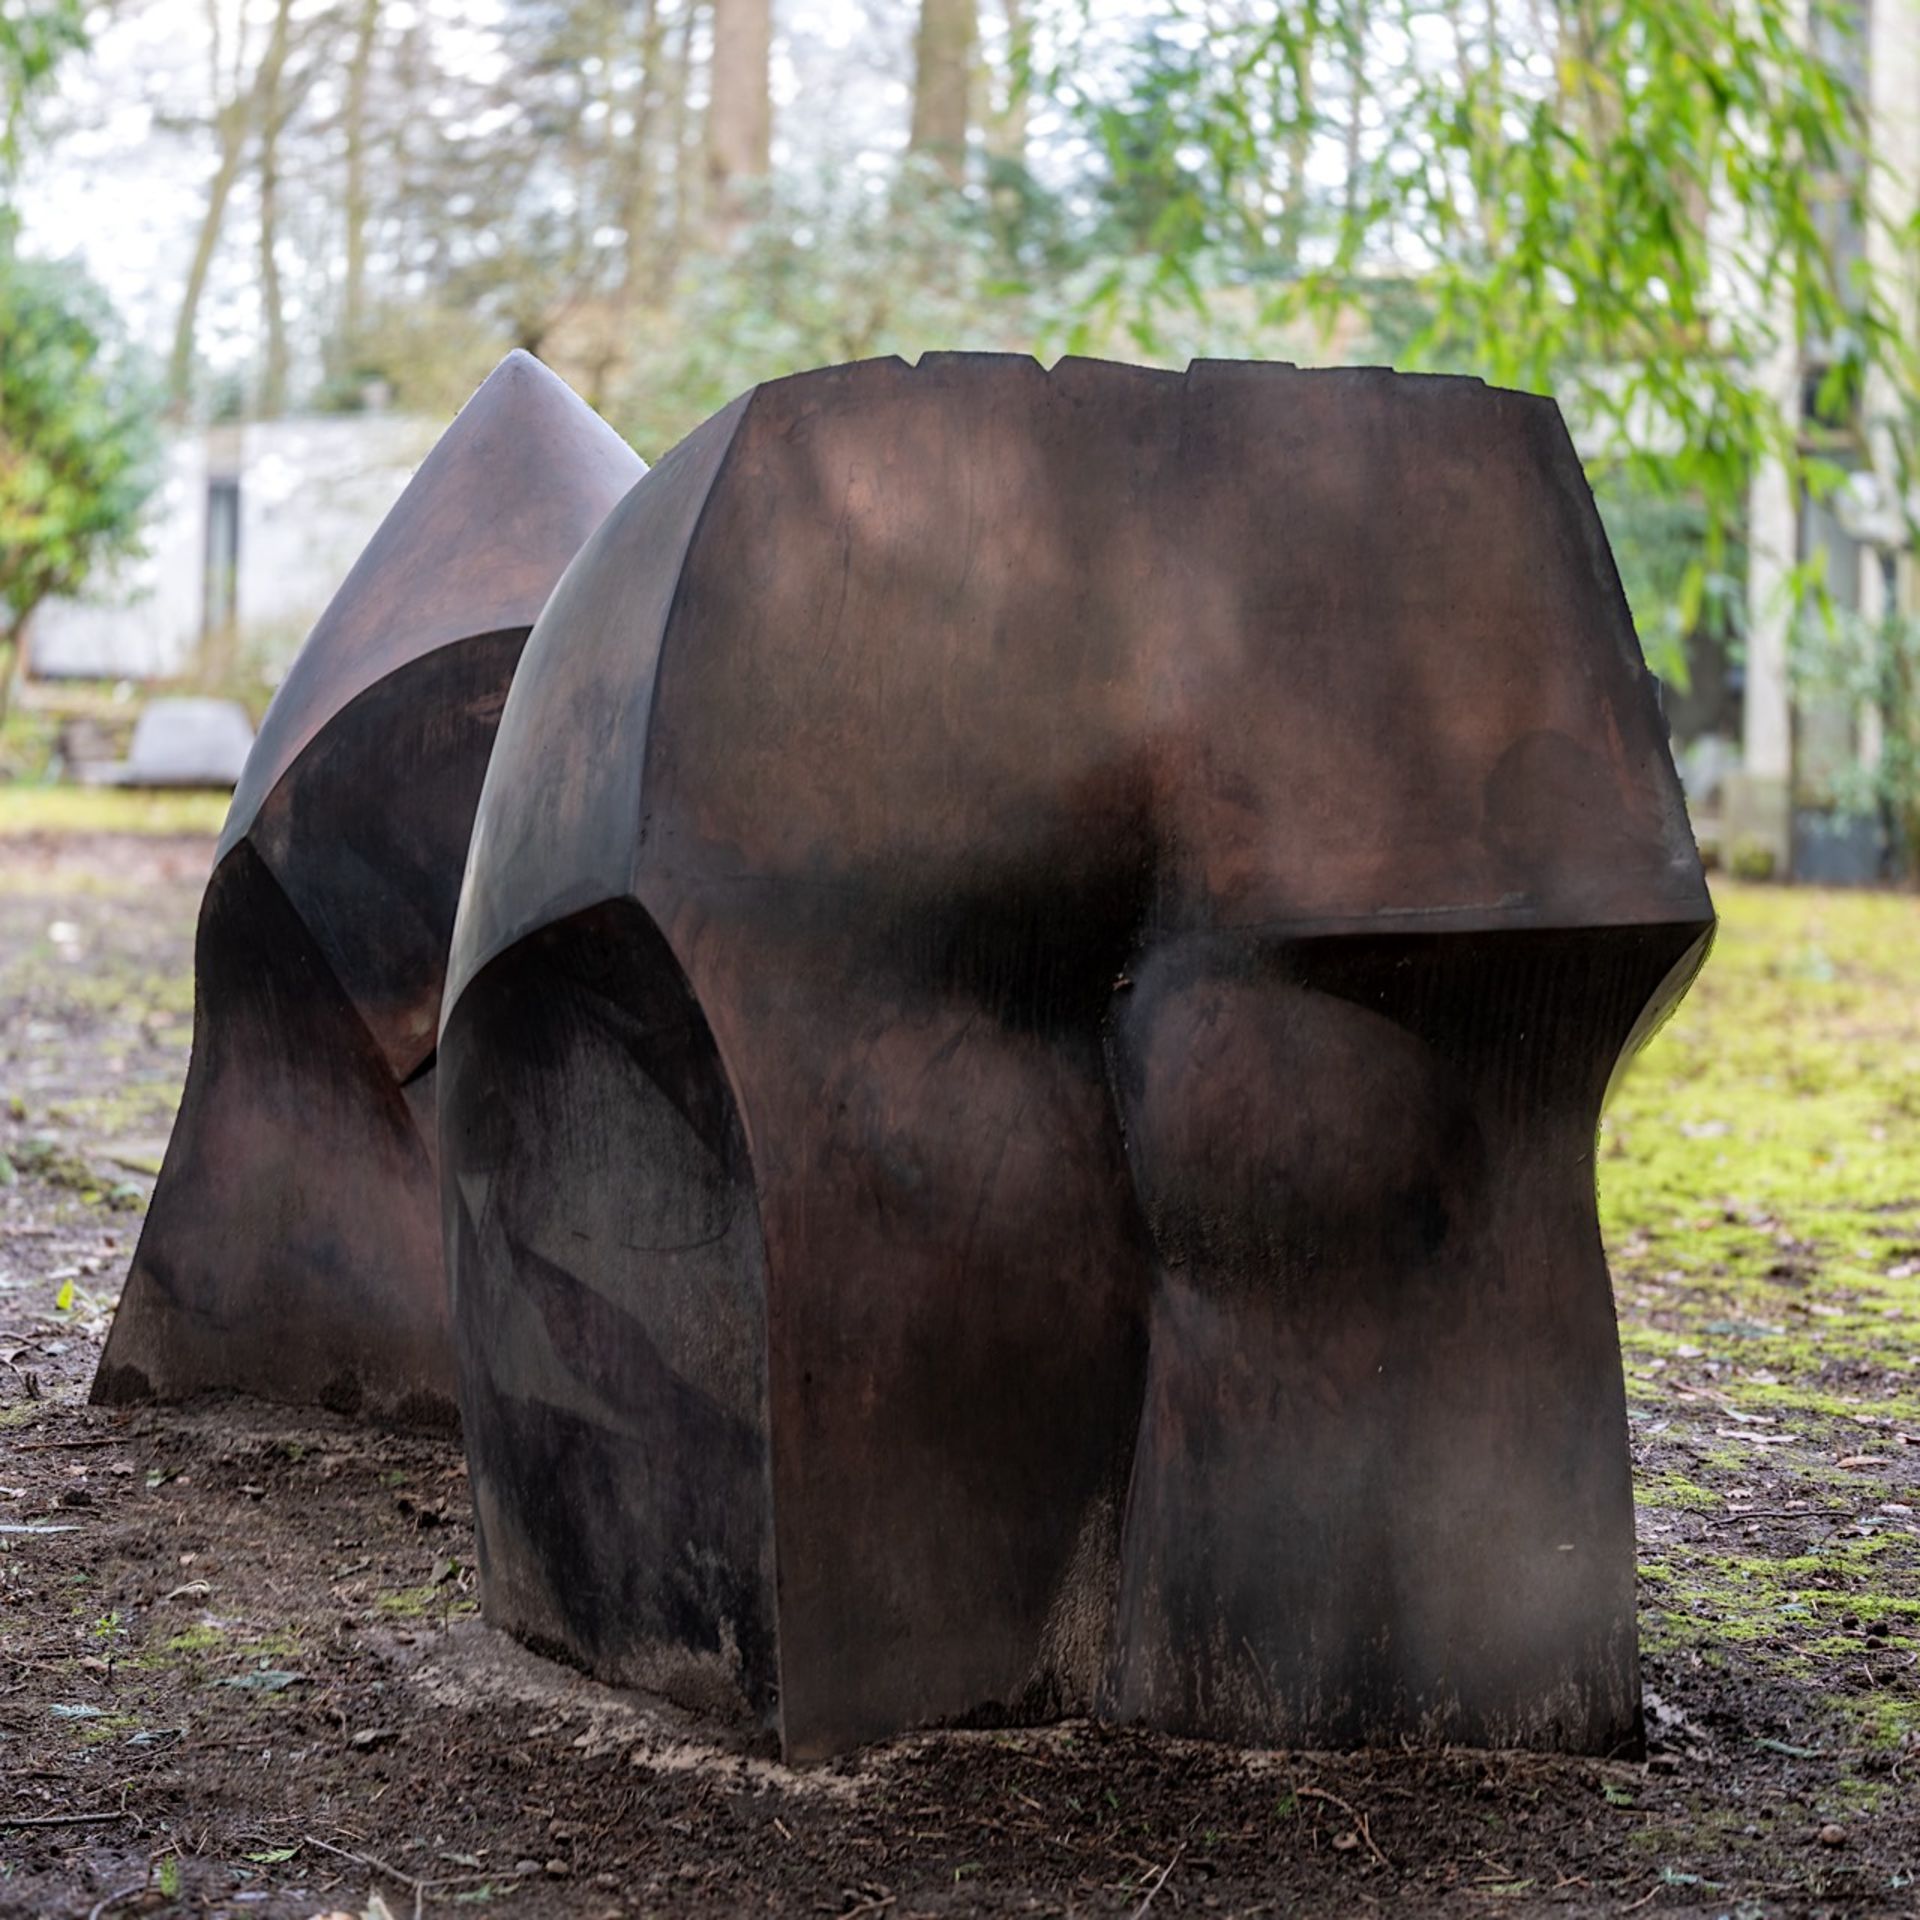 Pol Spilliaert (1935-2023), 'Herinnering', bronze patinated polyester, 1991-1993 - Image 6 of 8